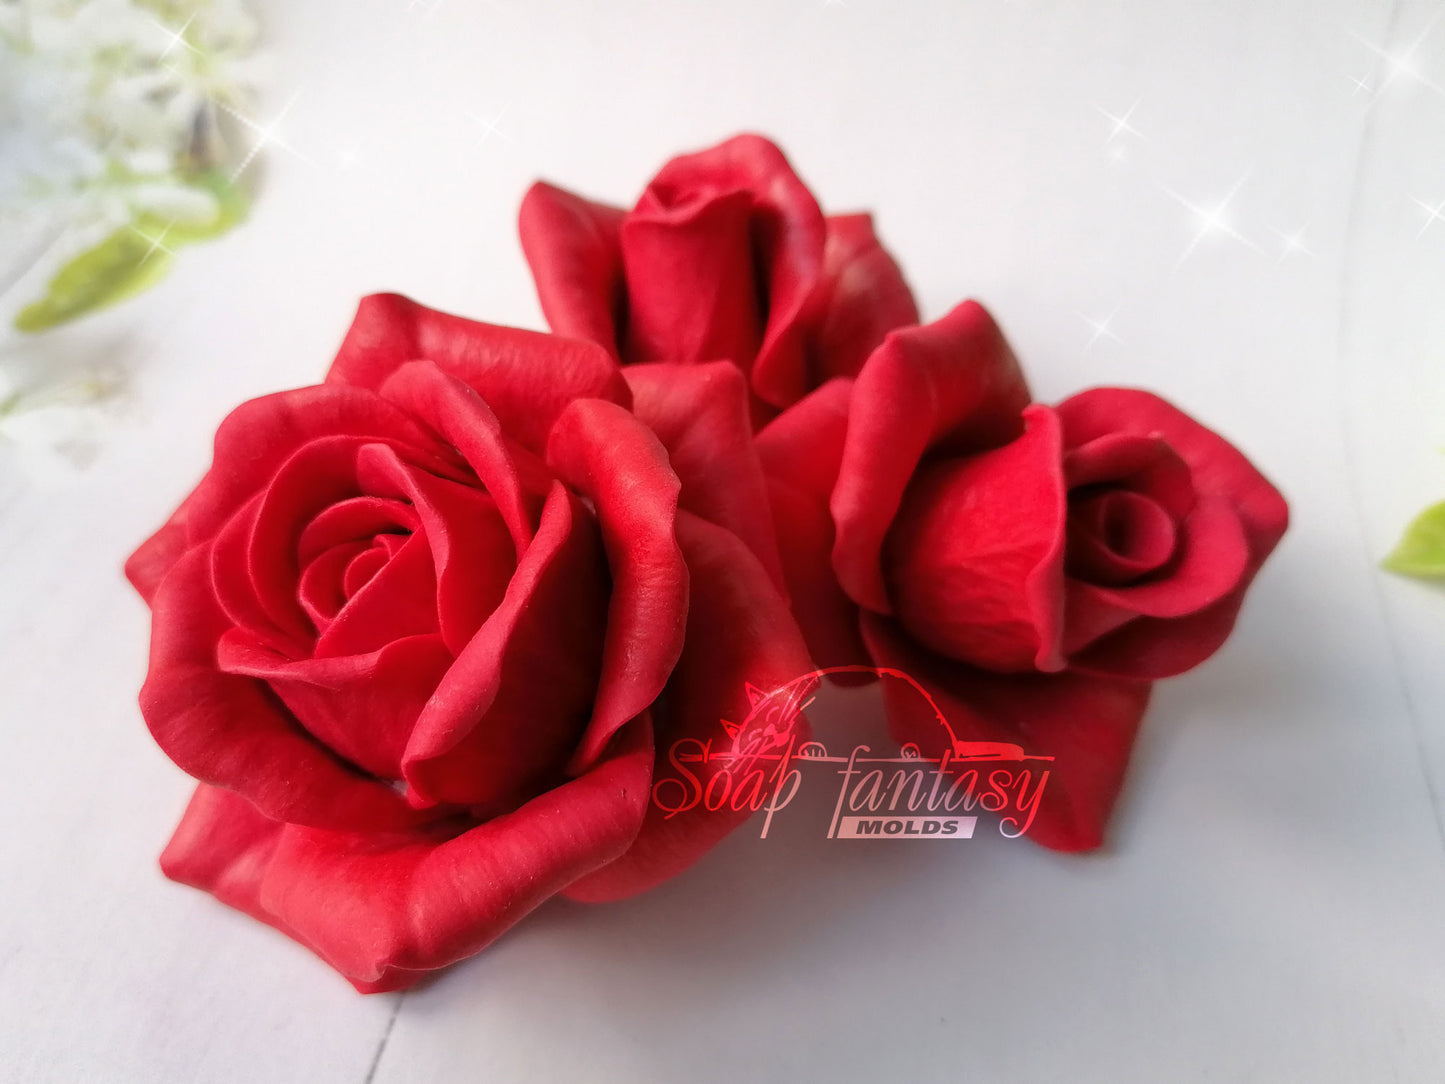 Medium roses "Lady in red" #1 silicone mold for soap making